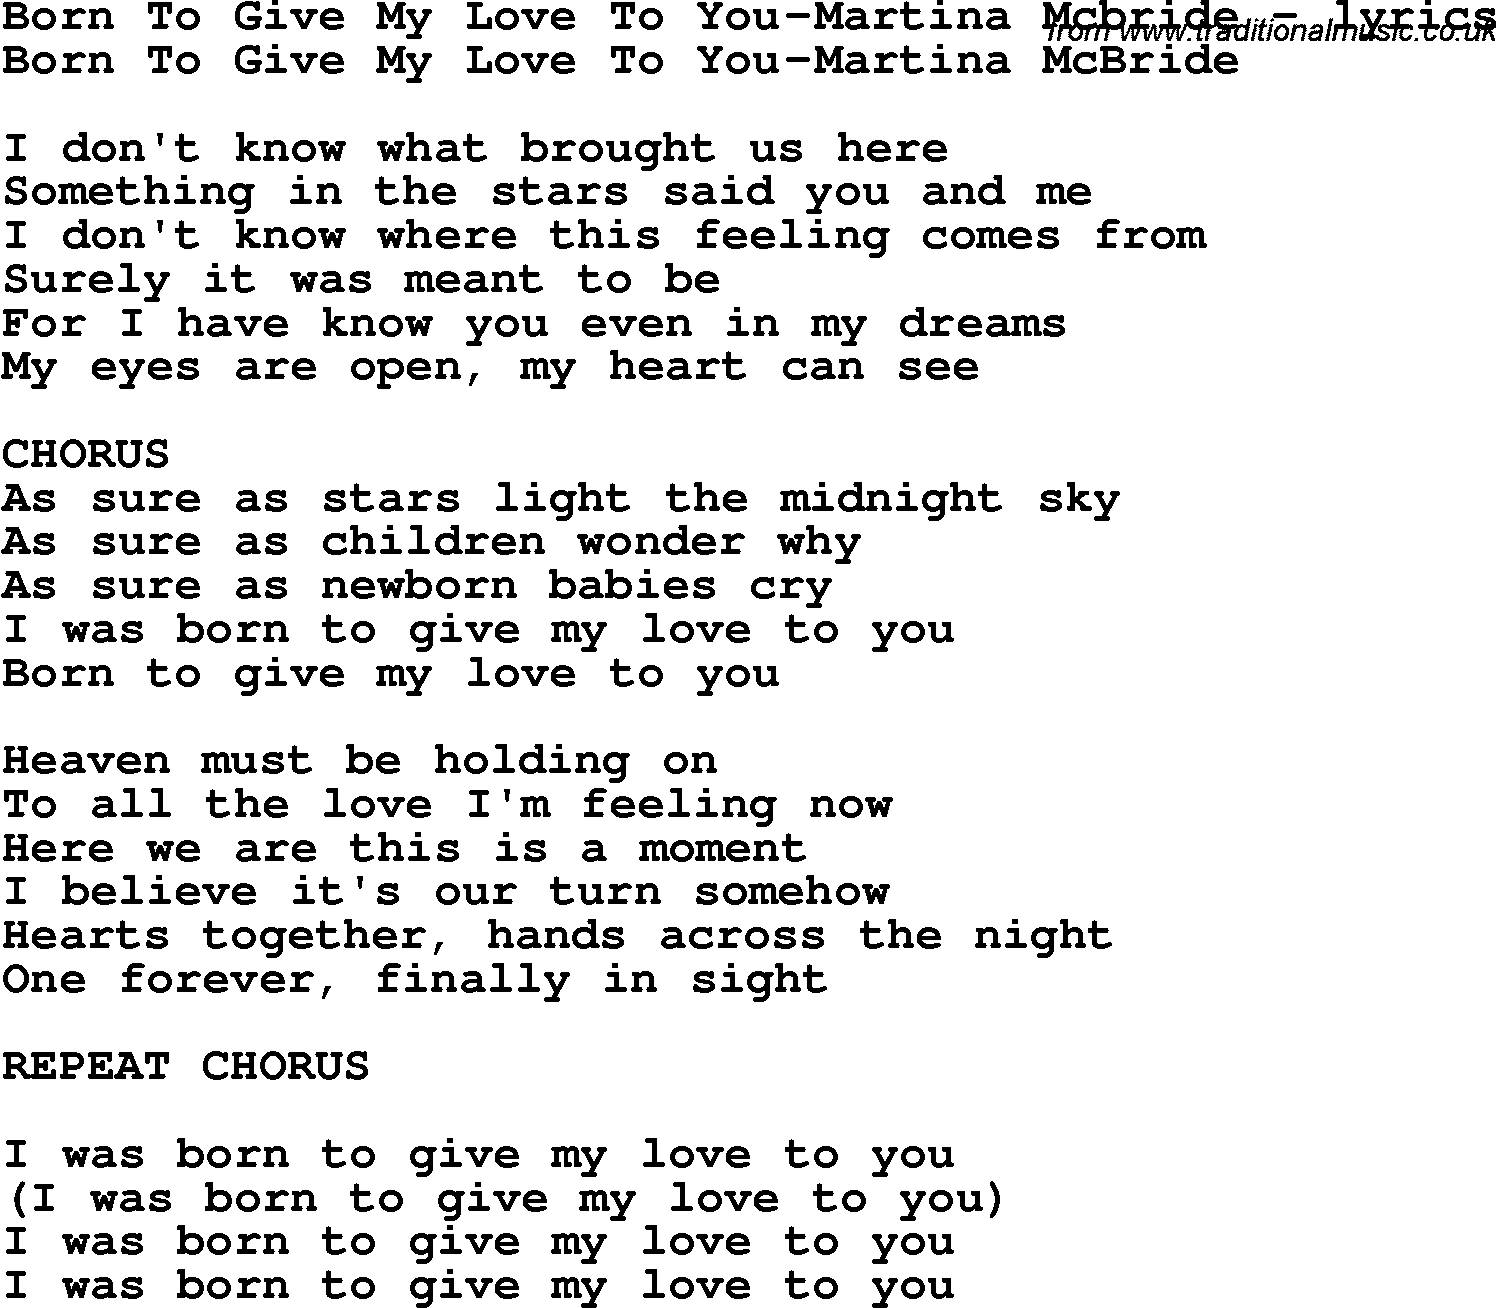 Love Song Lyrics for: Born To Give My Love To You-Martina Mcbride